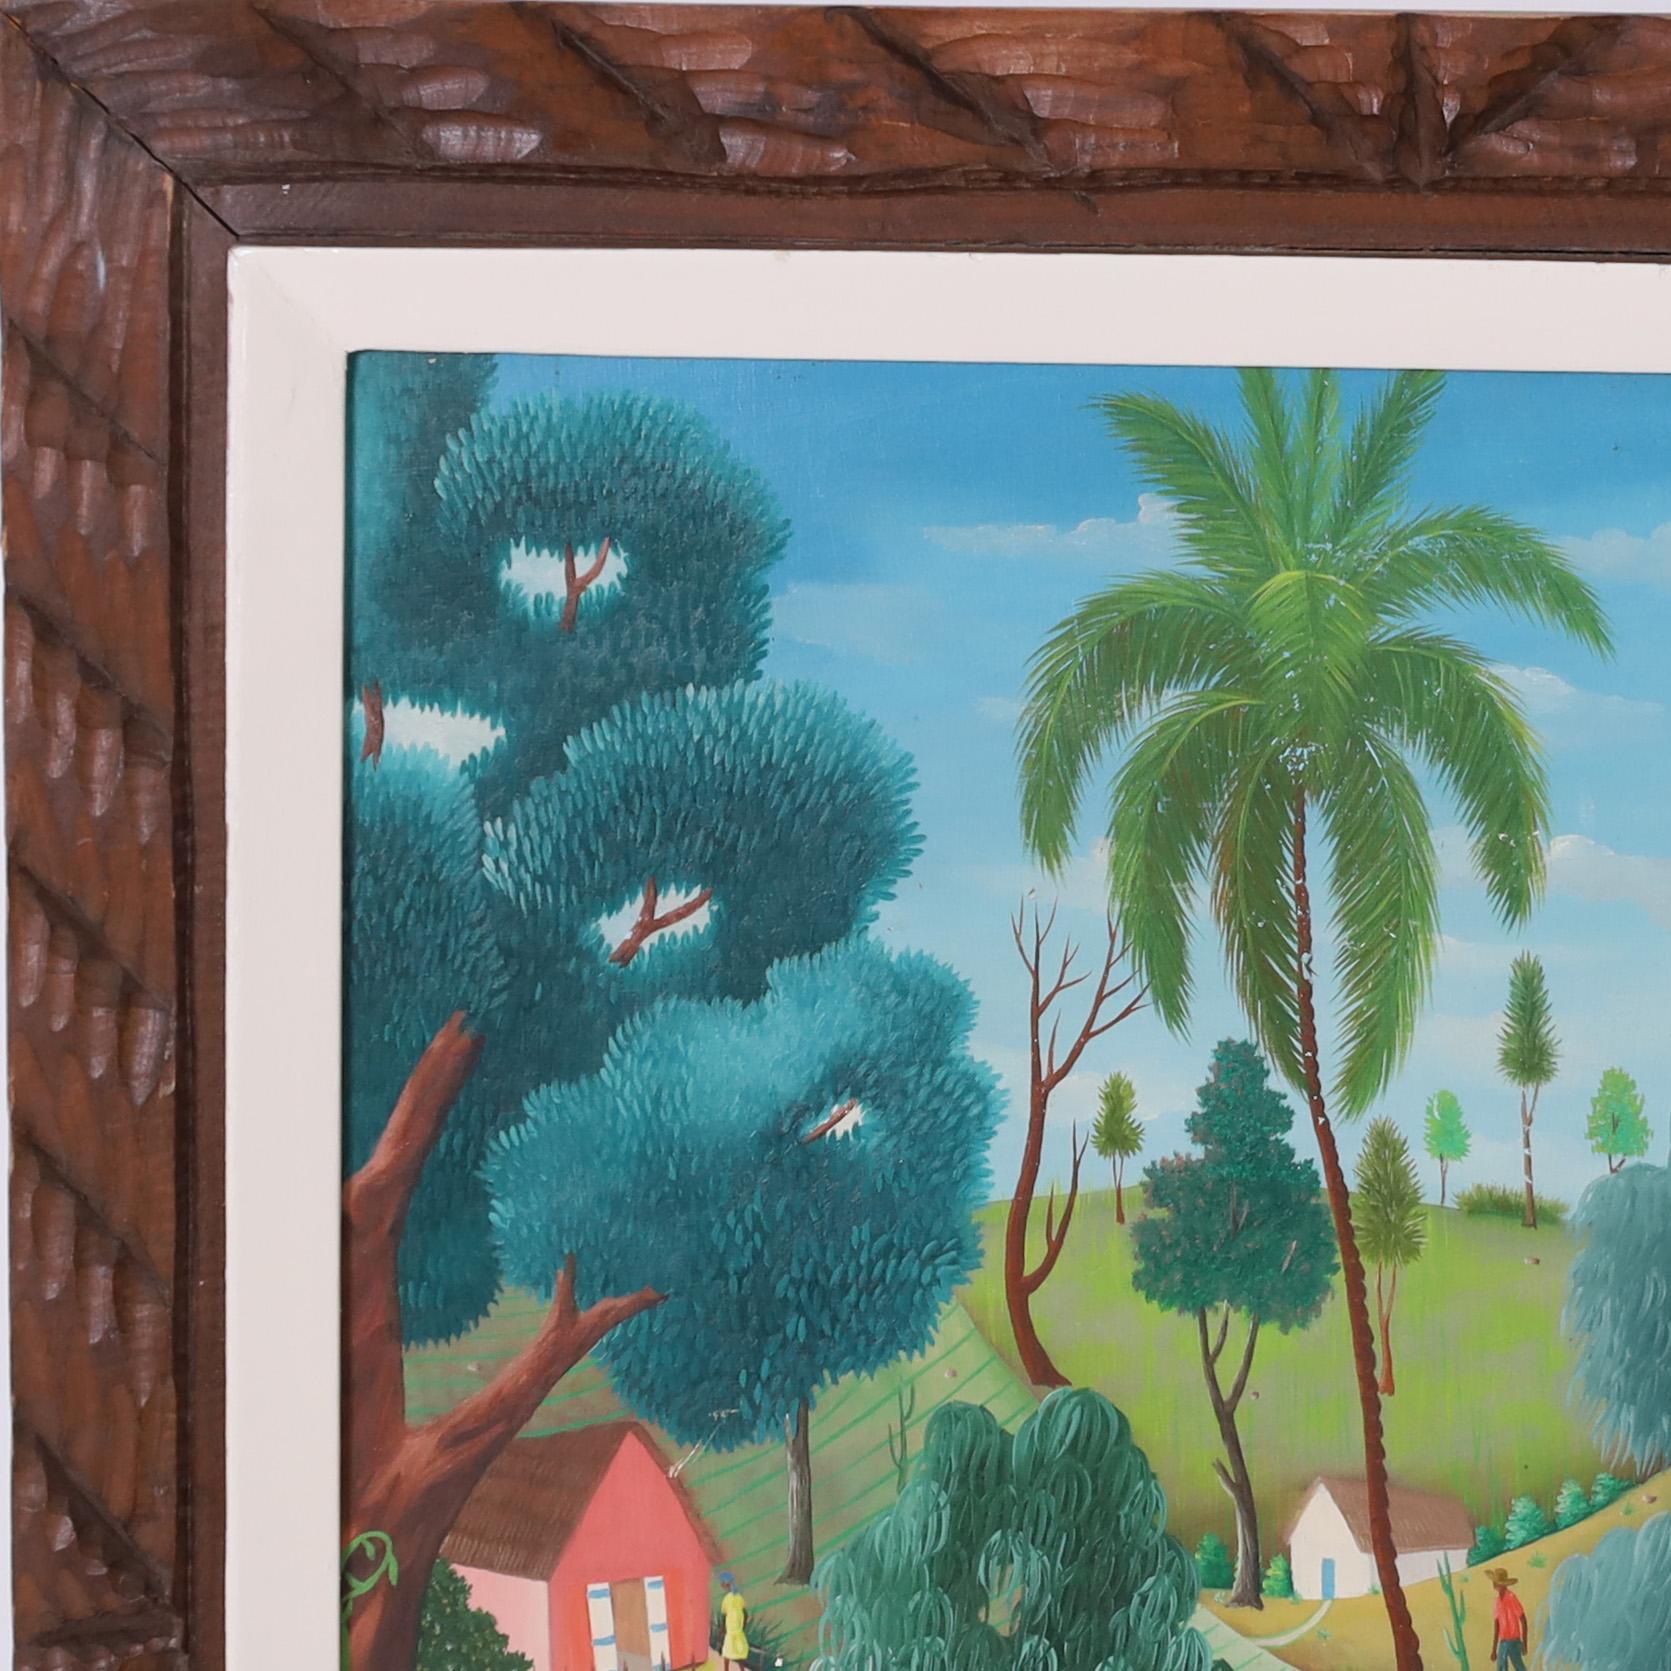 Fanciful vintage Haitian acrylic painting on board depicting an idyllic rural village executed in a playful naive technique. Signed Phiton Latortue and presented in the original carved wood frame.